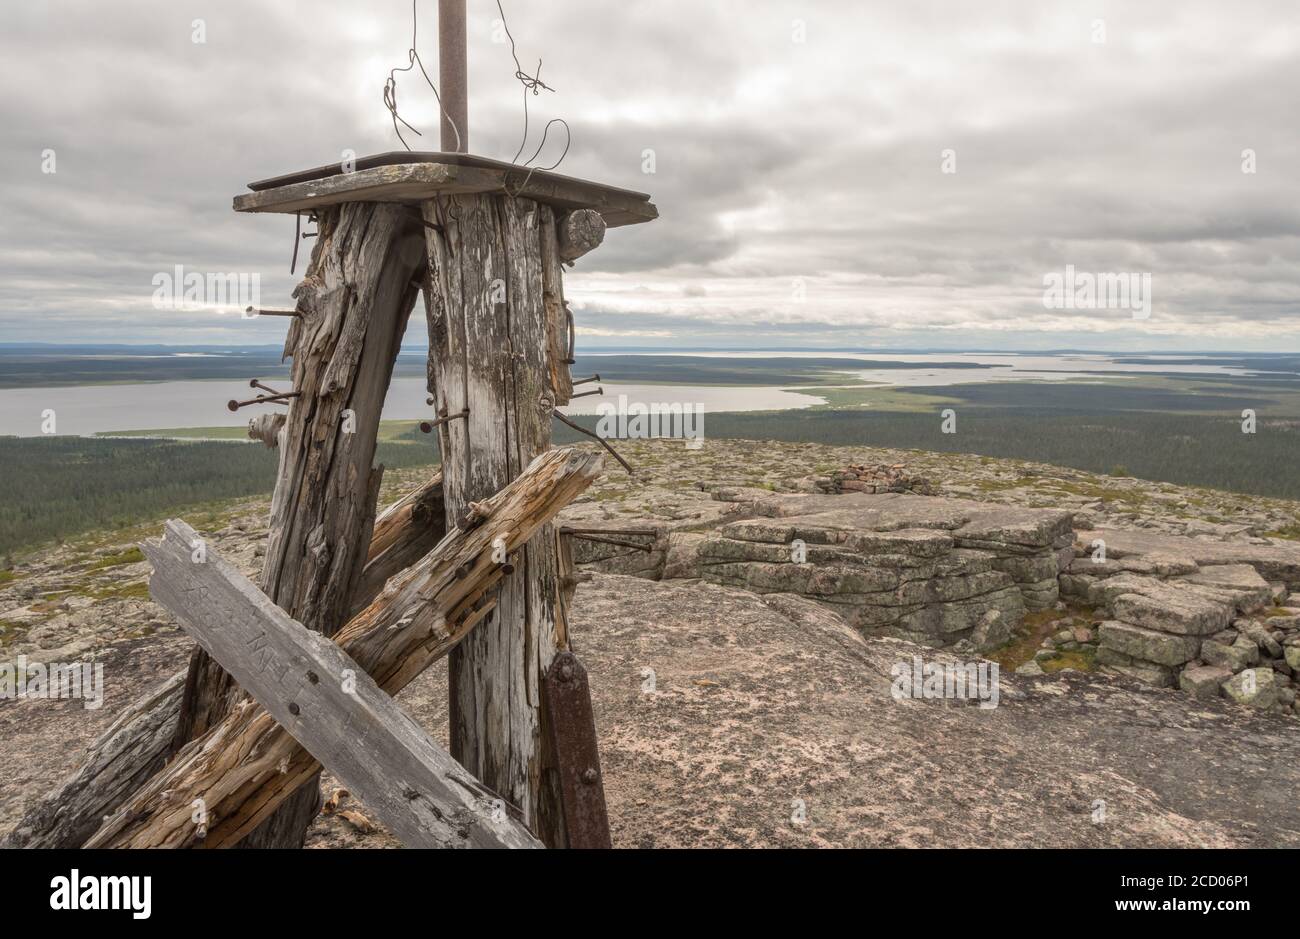 View from Pyhä-Nattanen fell in Finland's Lapland Stock Photo